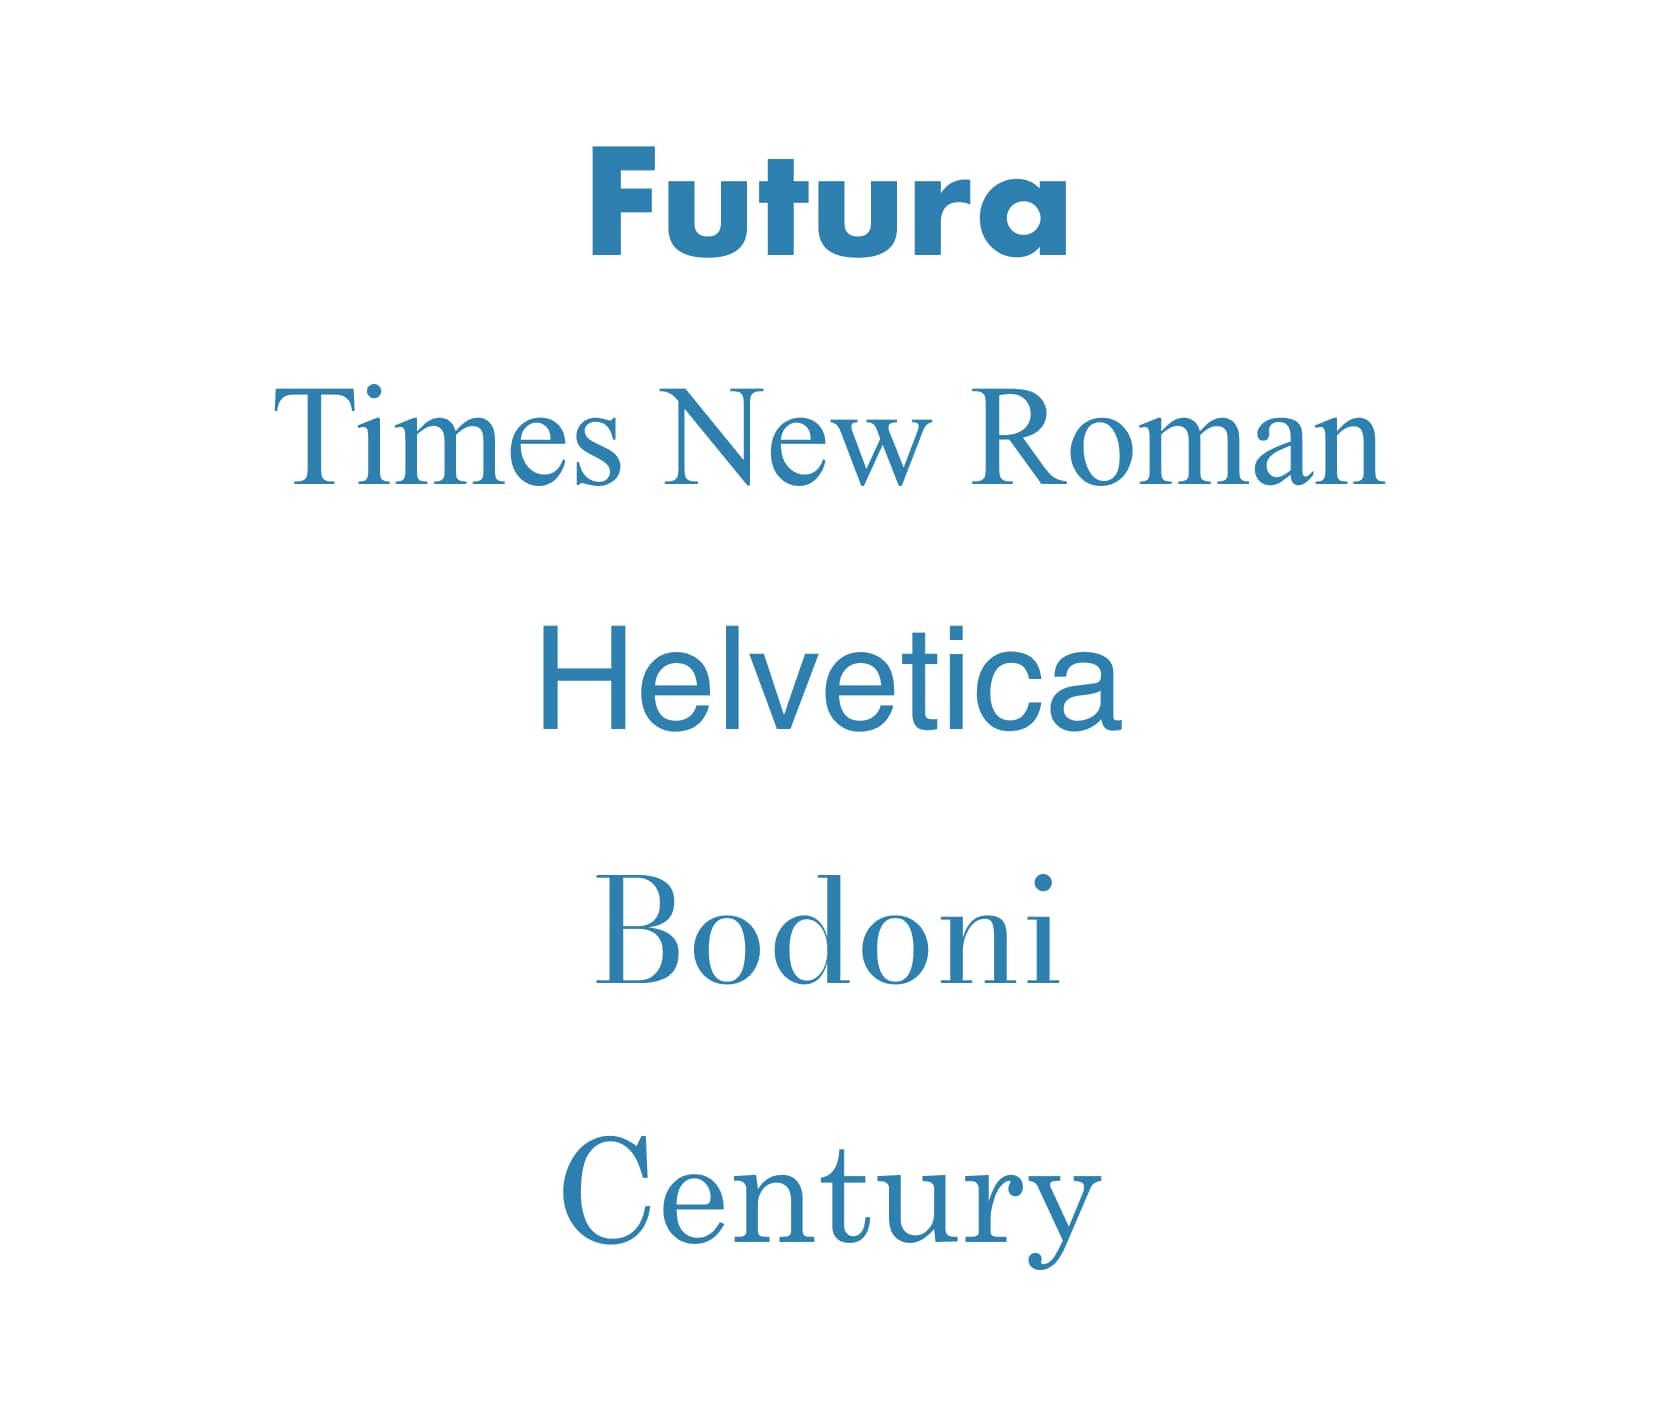 Massimo Vignelli’s 5 fonts which he built his rich career on: Futura, Times New Roman, Helvetica, Bodoni, Century.